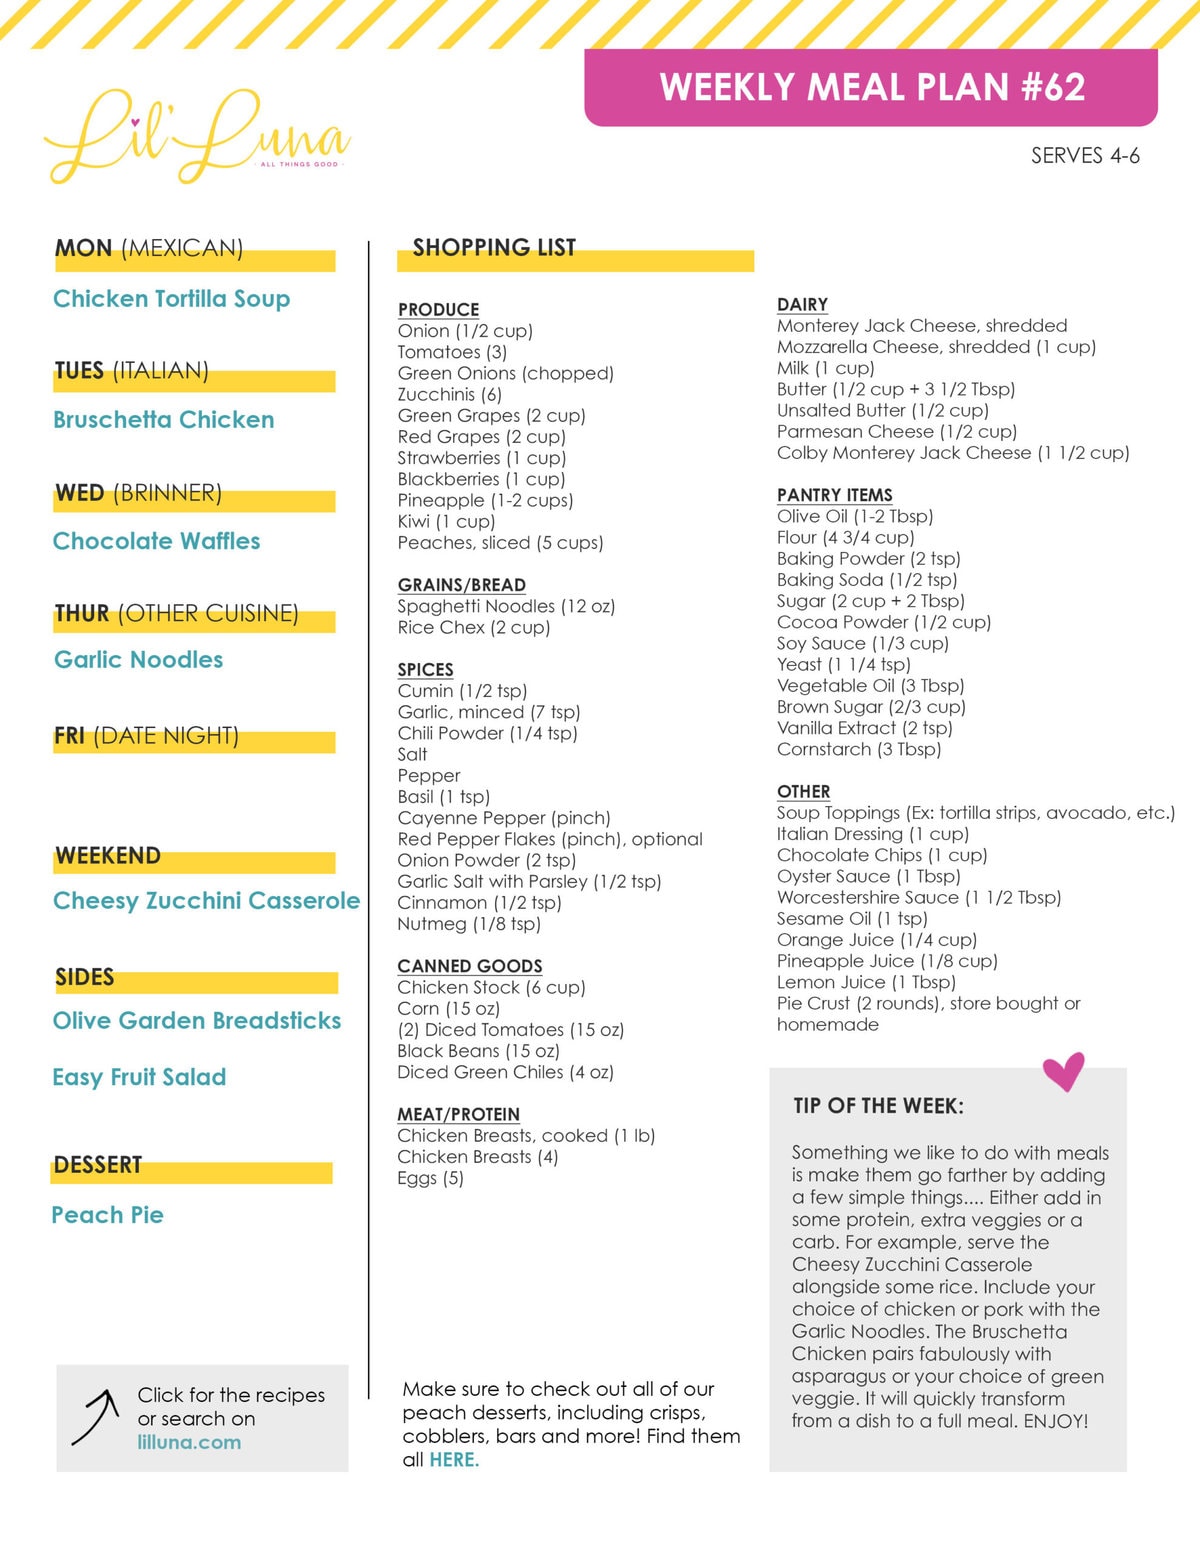 Printable version of Meal Plan #62 with grocery list.